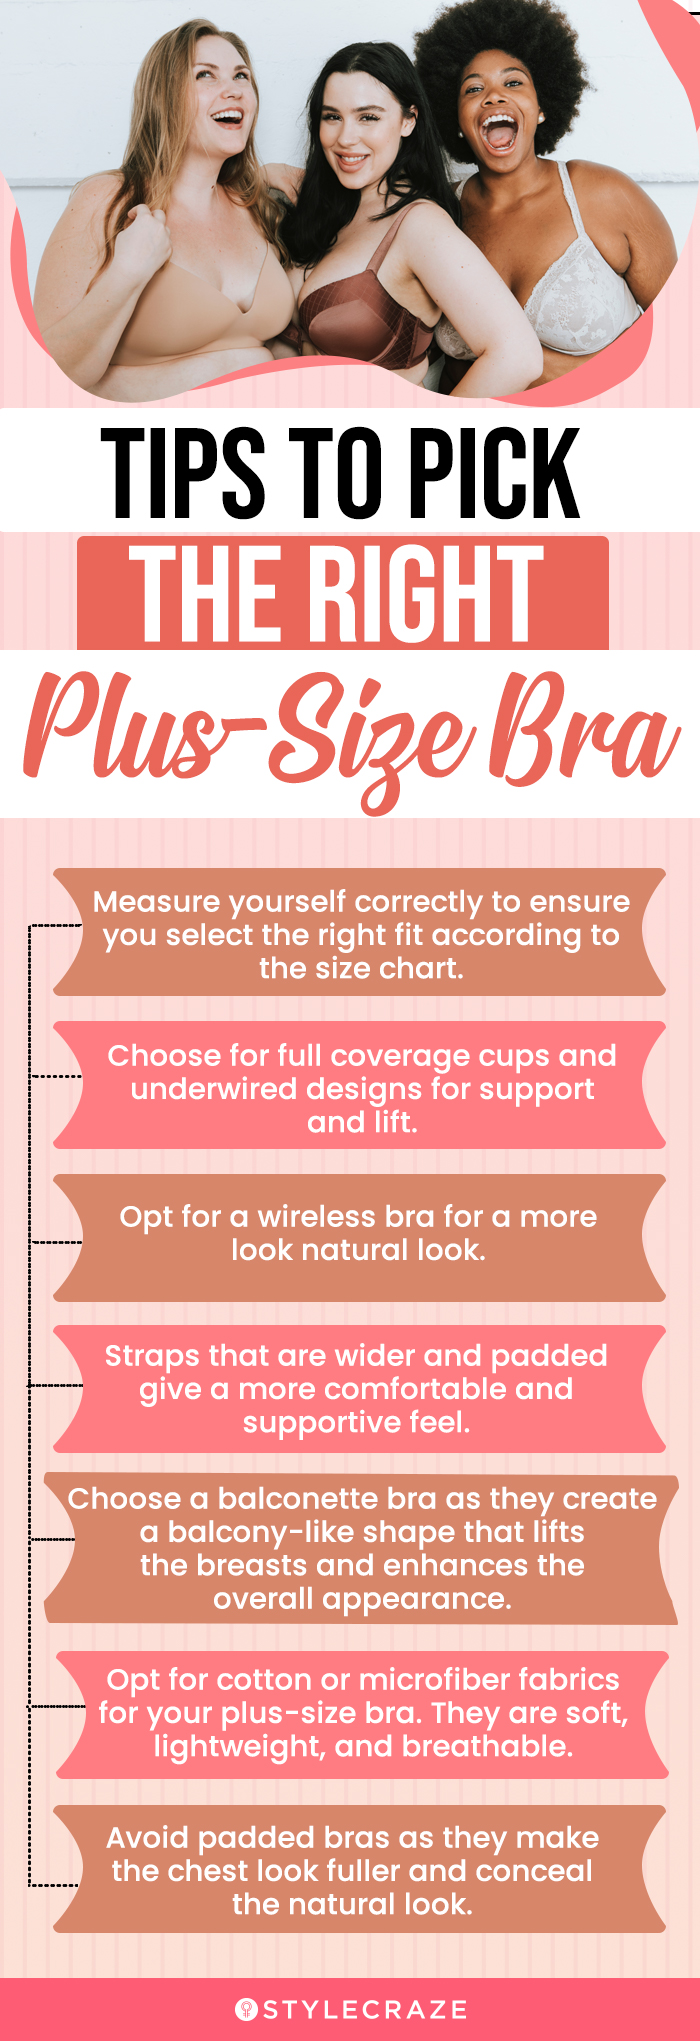 Tips To Pick The Right Plus-Size Bra (infographic)